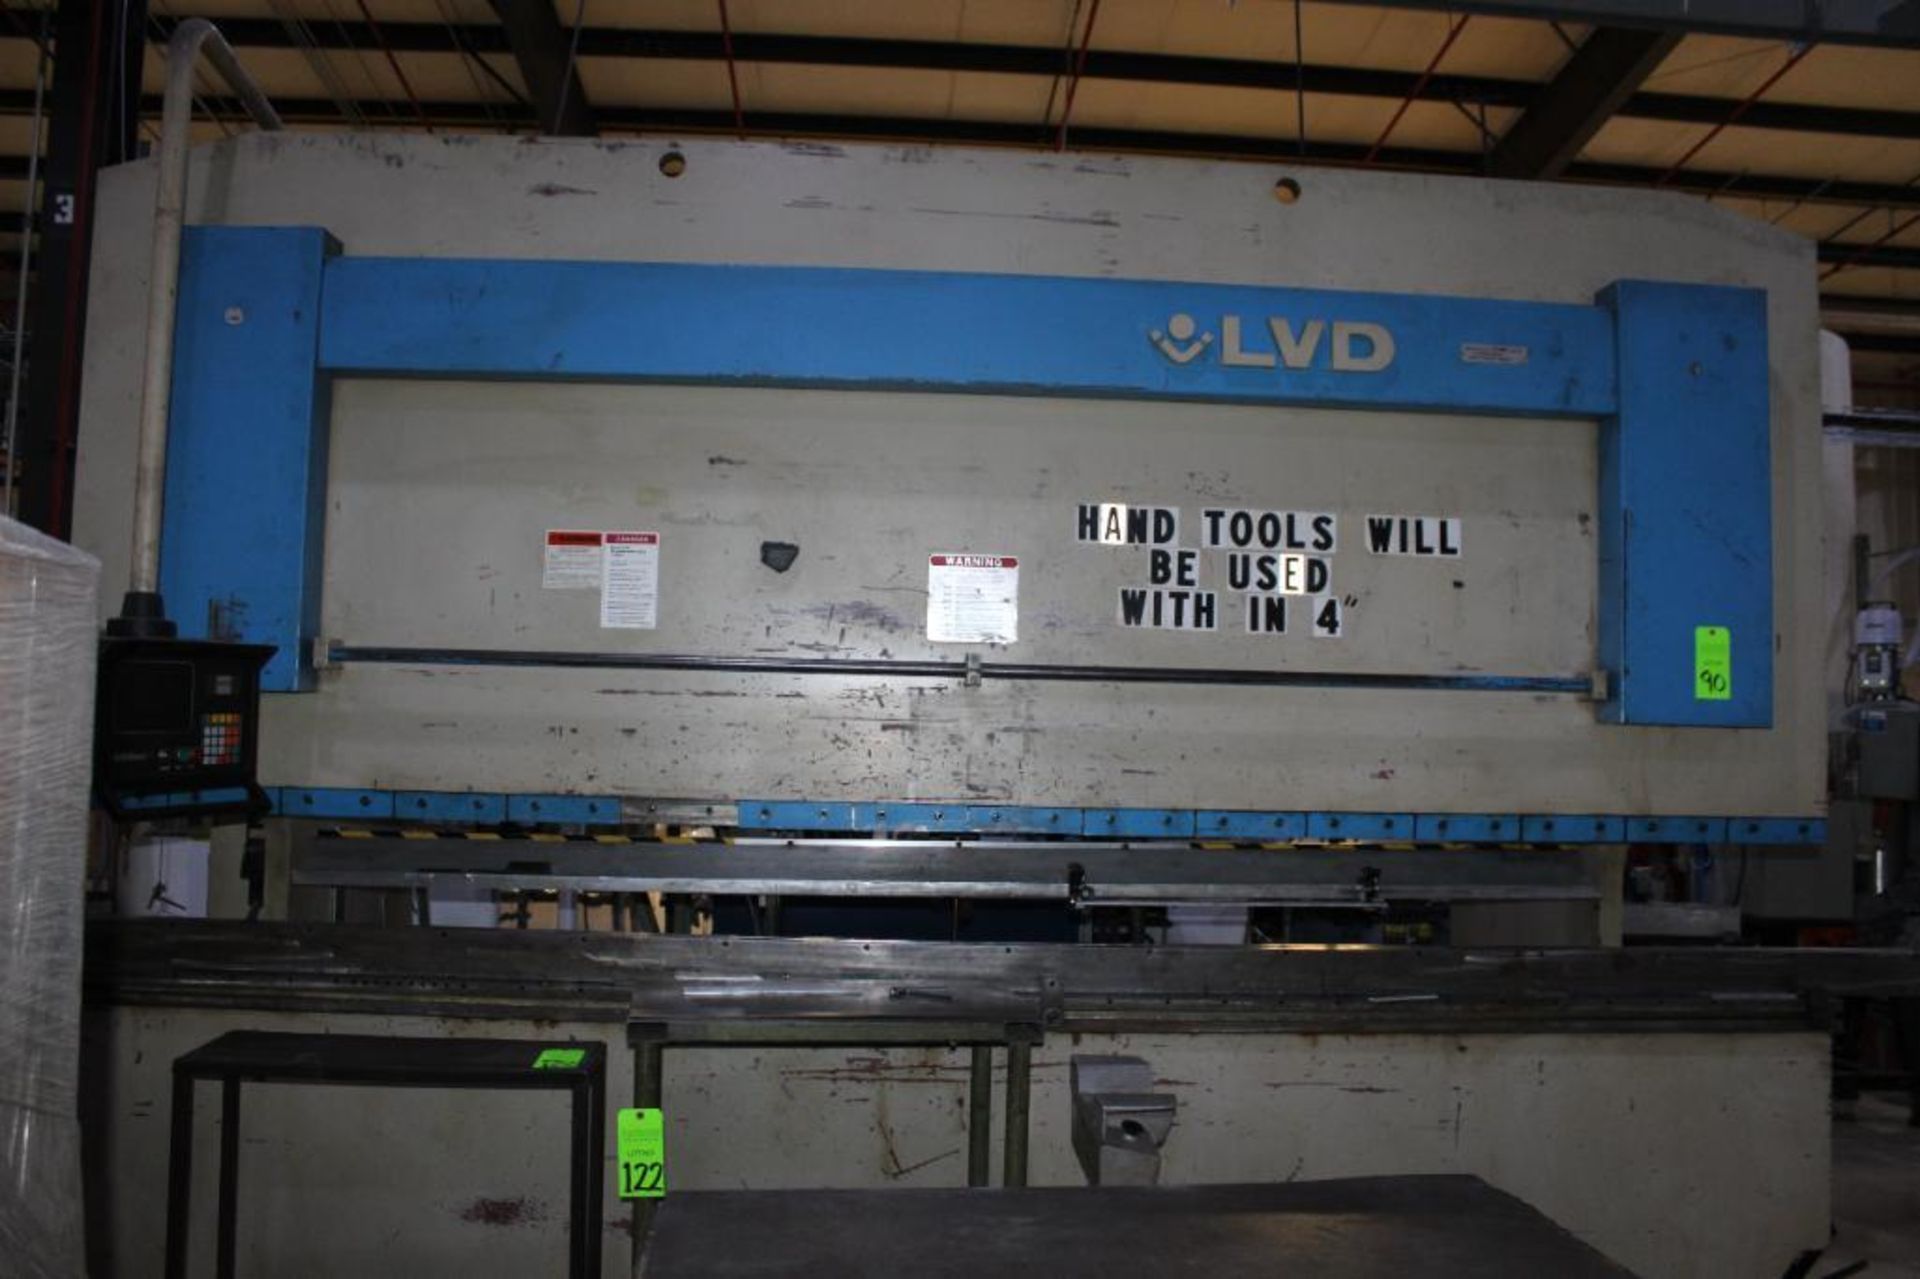 1995 LVD Hydraulic Press Brake Model 180JS13 Equipped With Hurco AutoBend 7 CNC Back Gage - Image 22 of 22